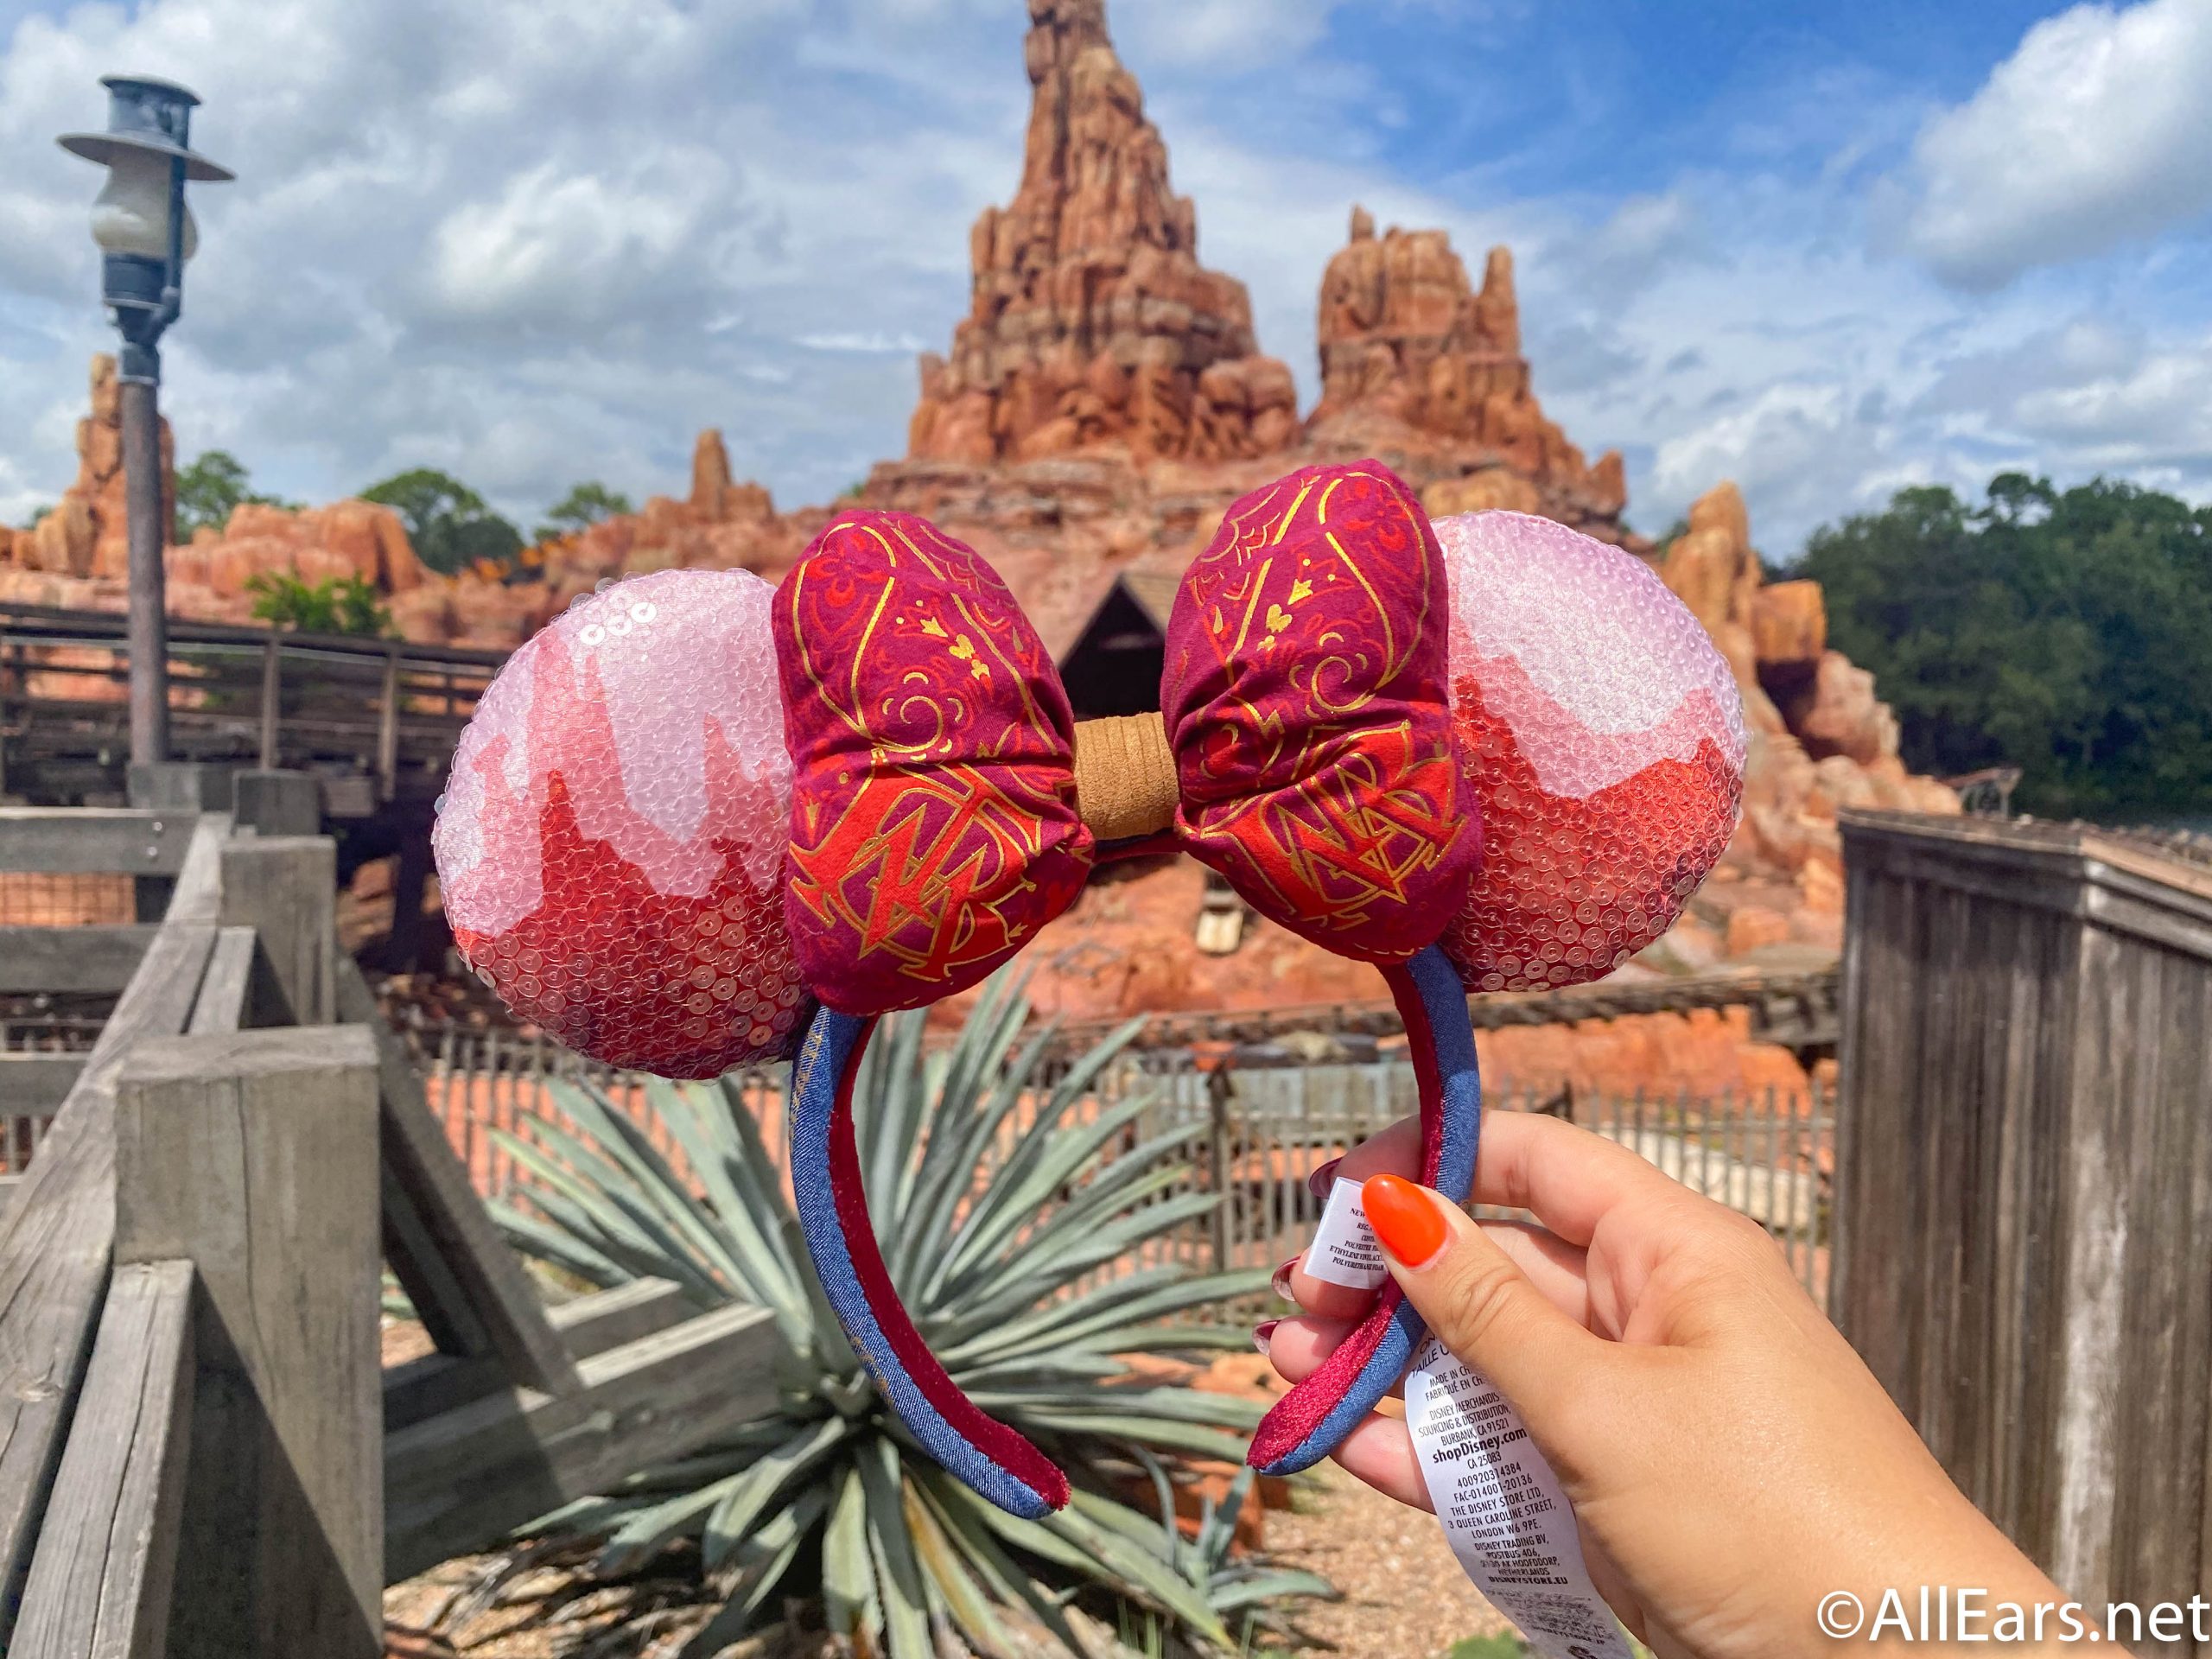 It S The Wildest Merchandise In The Wilderness Here S All The Big Thunder Mountain Railroad Anniversary Items You Can Find In Disney World Allears Net